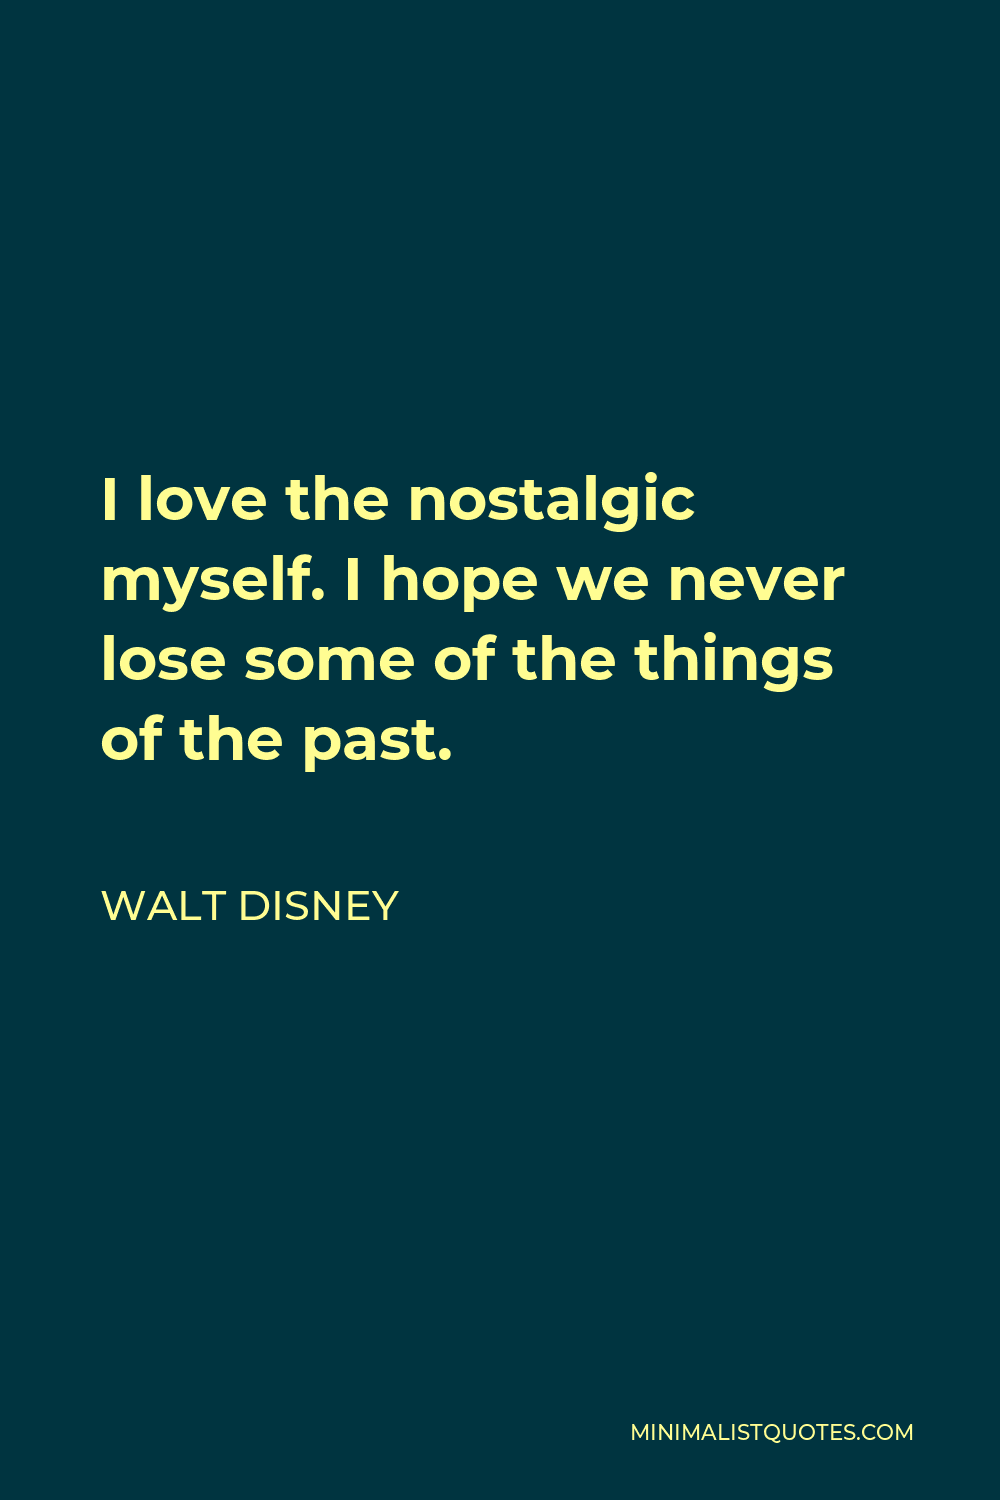 Walt Disney Quote - I love the nostalgic myself. I hope we never lose some of the things of the past.